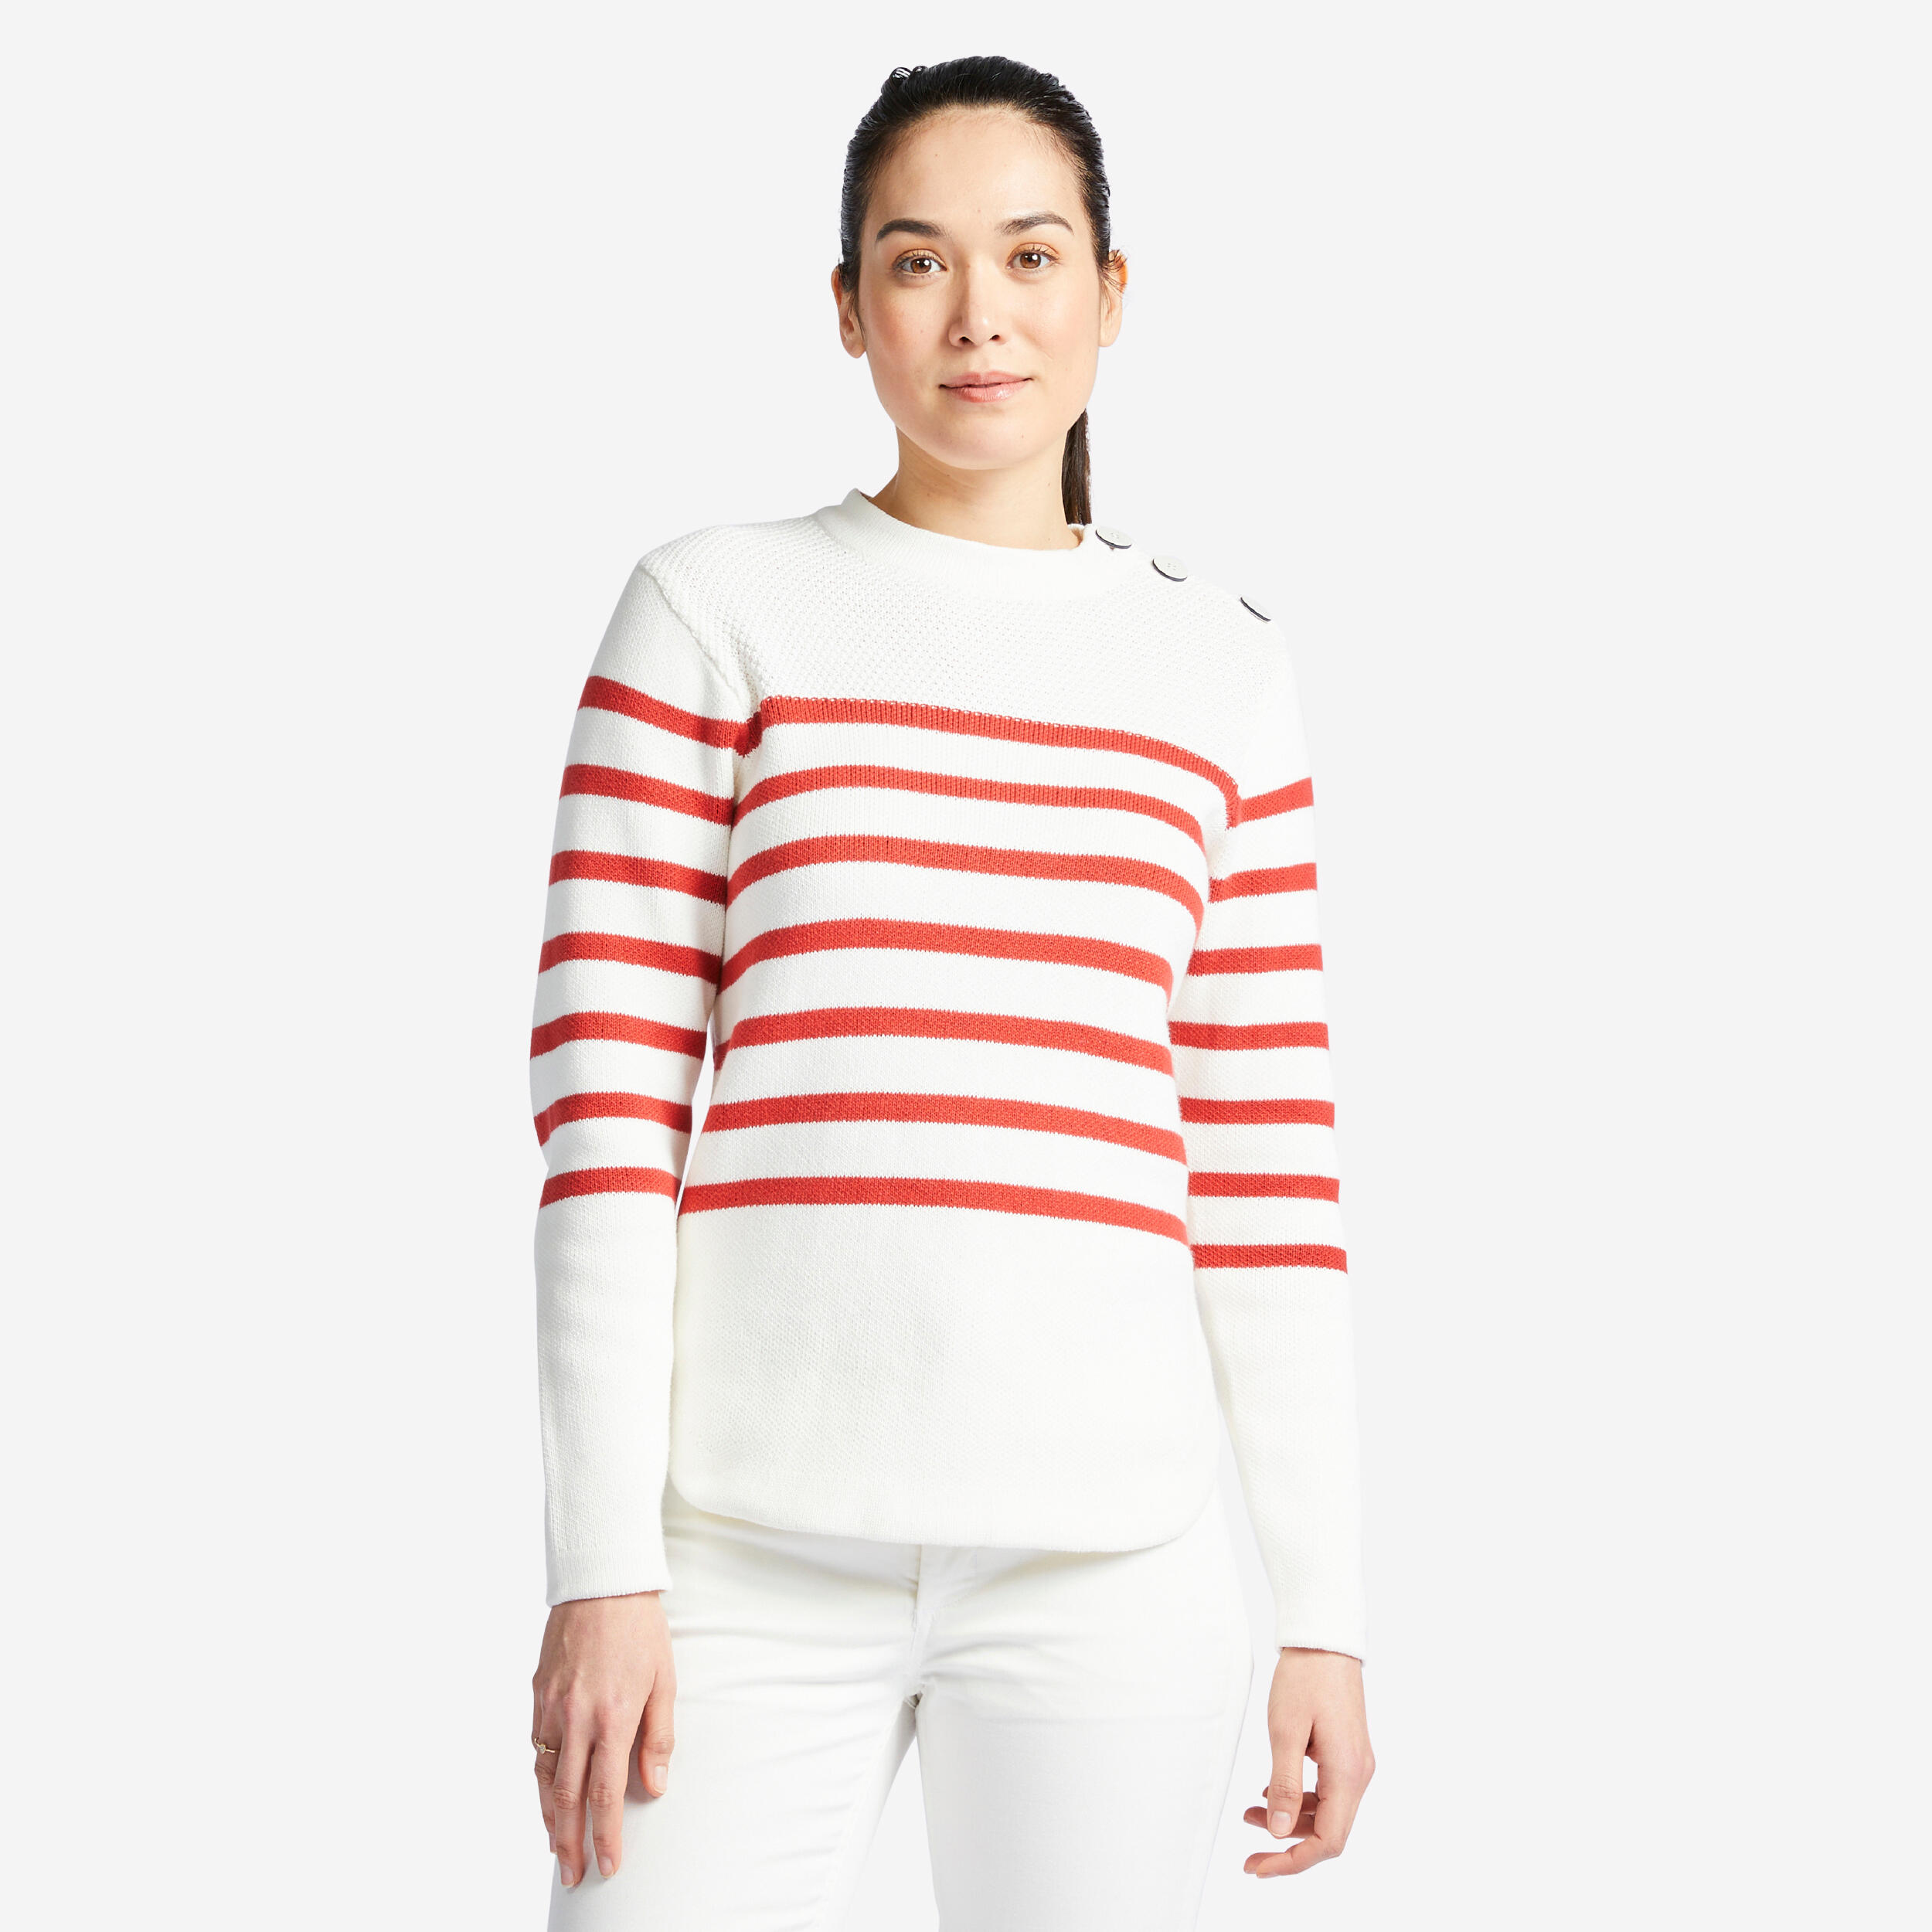 Women's Marine Pullover - White and Red Striped TRIBORD | Decathlon